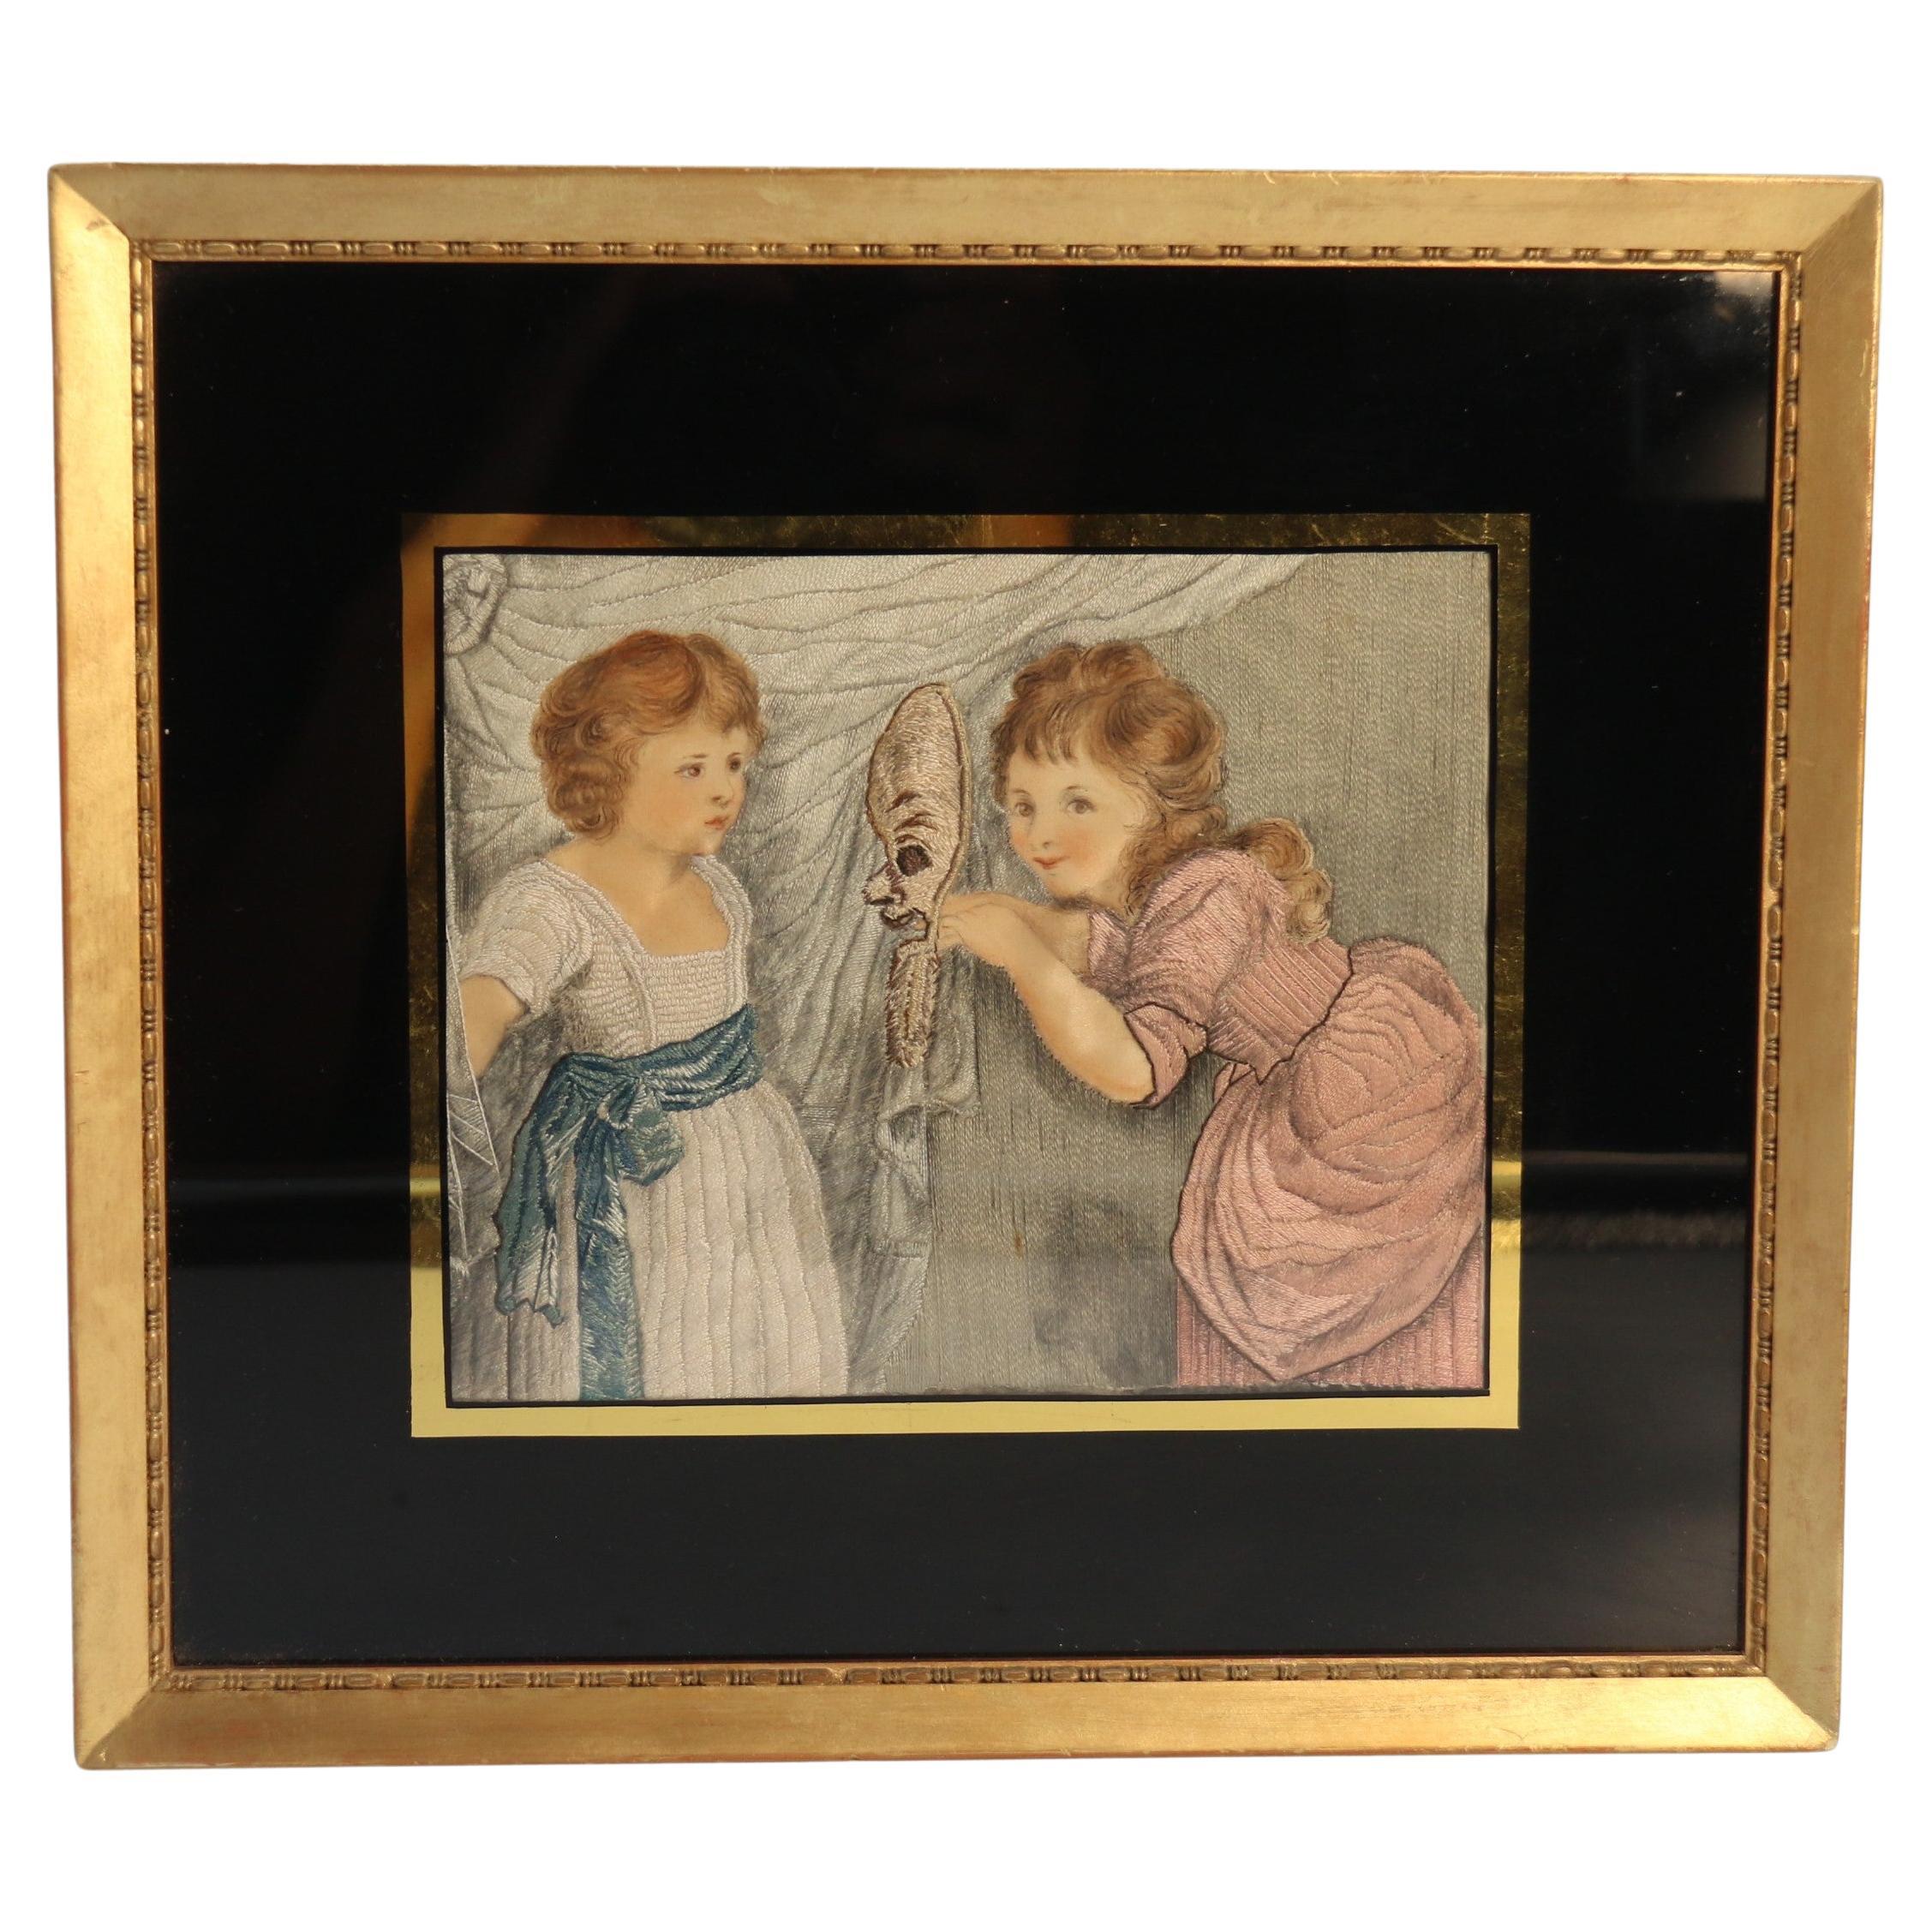 19th century English hand painted on silk needlework picture circa 1830